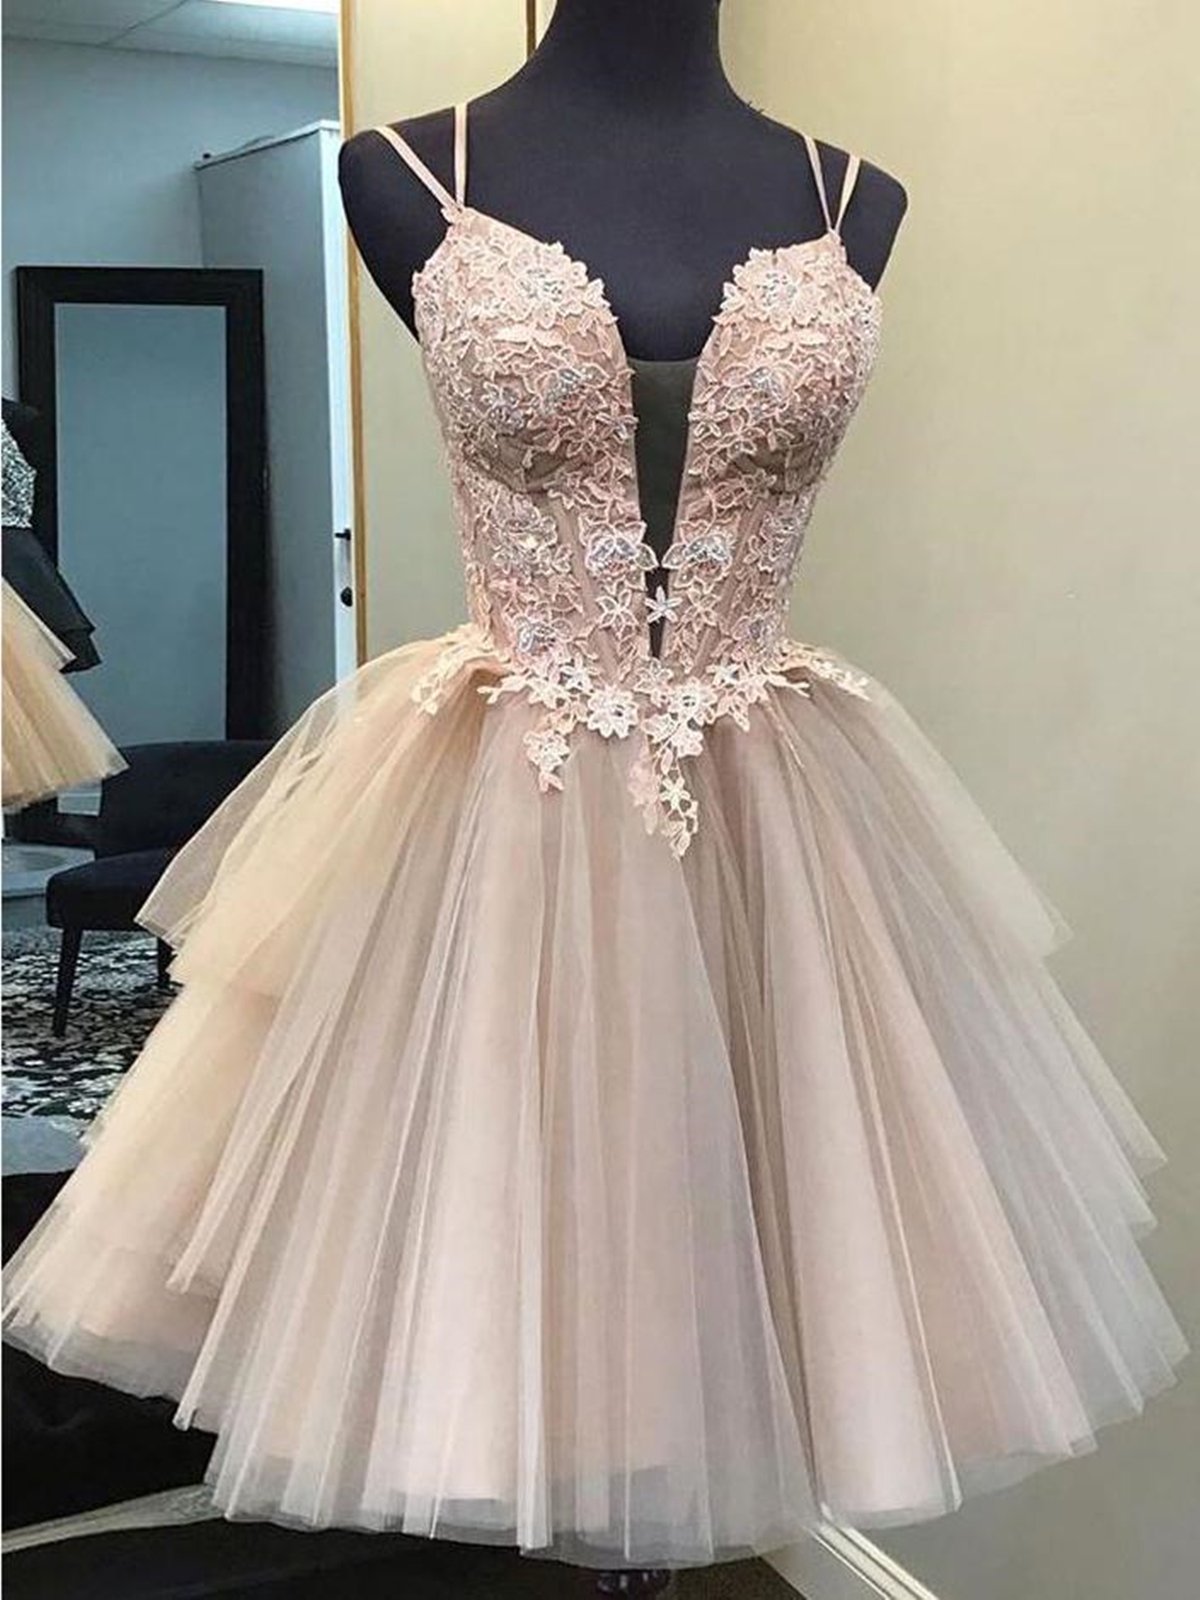 Prom Theme, Short Backless Champagne Lace Prom Dresses, Short V Neck Champagne Lace Graduation Homecoming Dresses